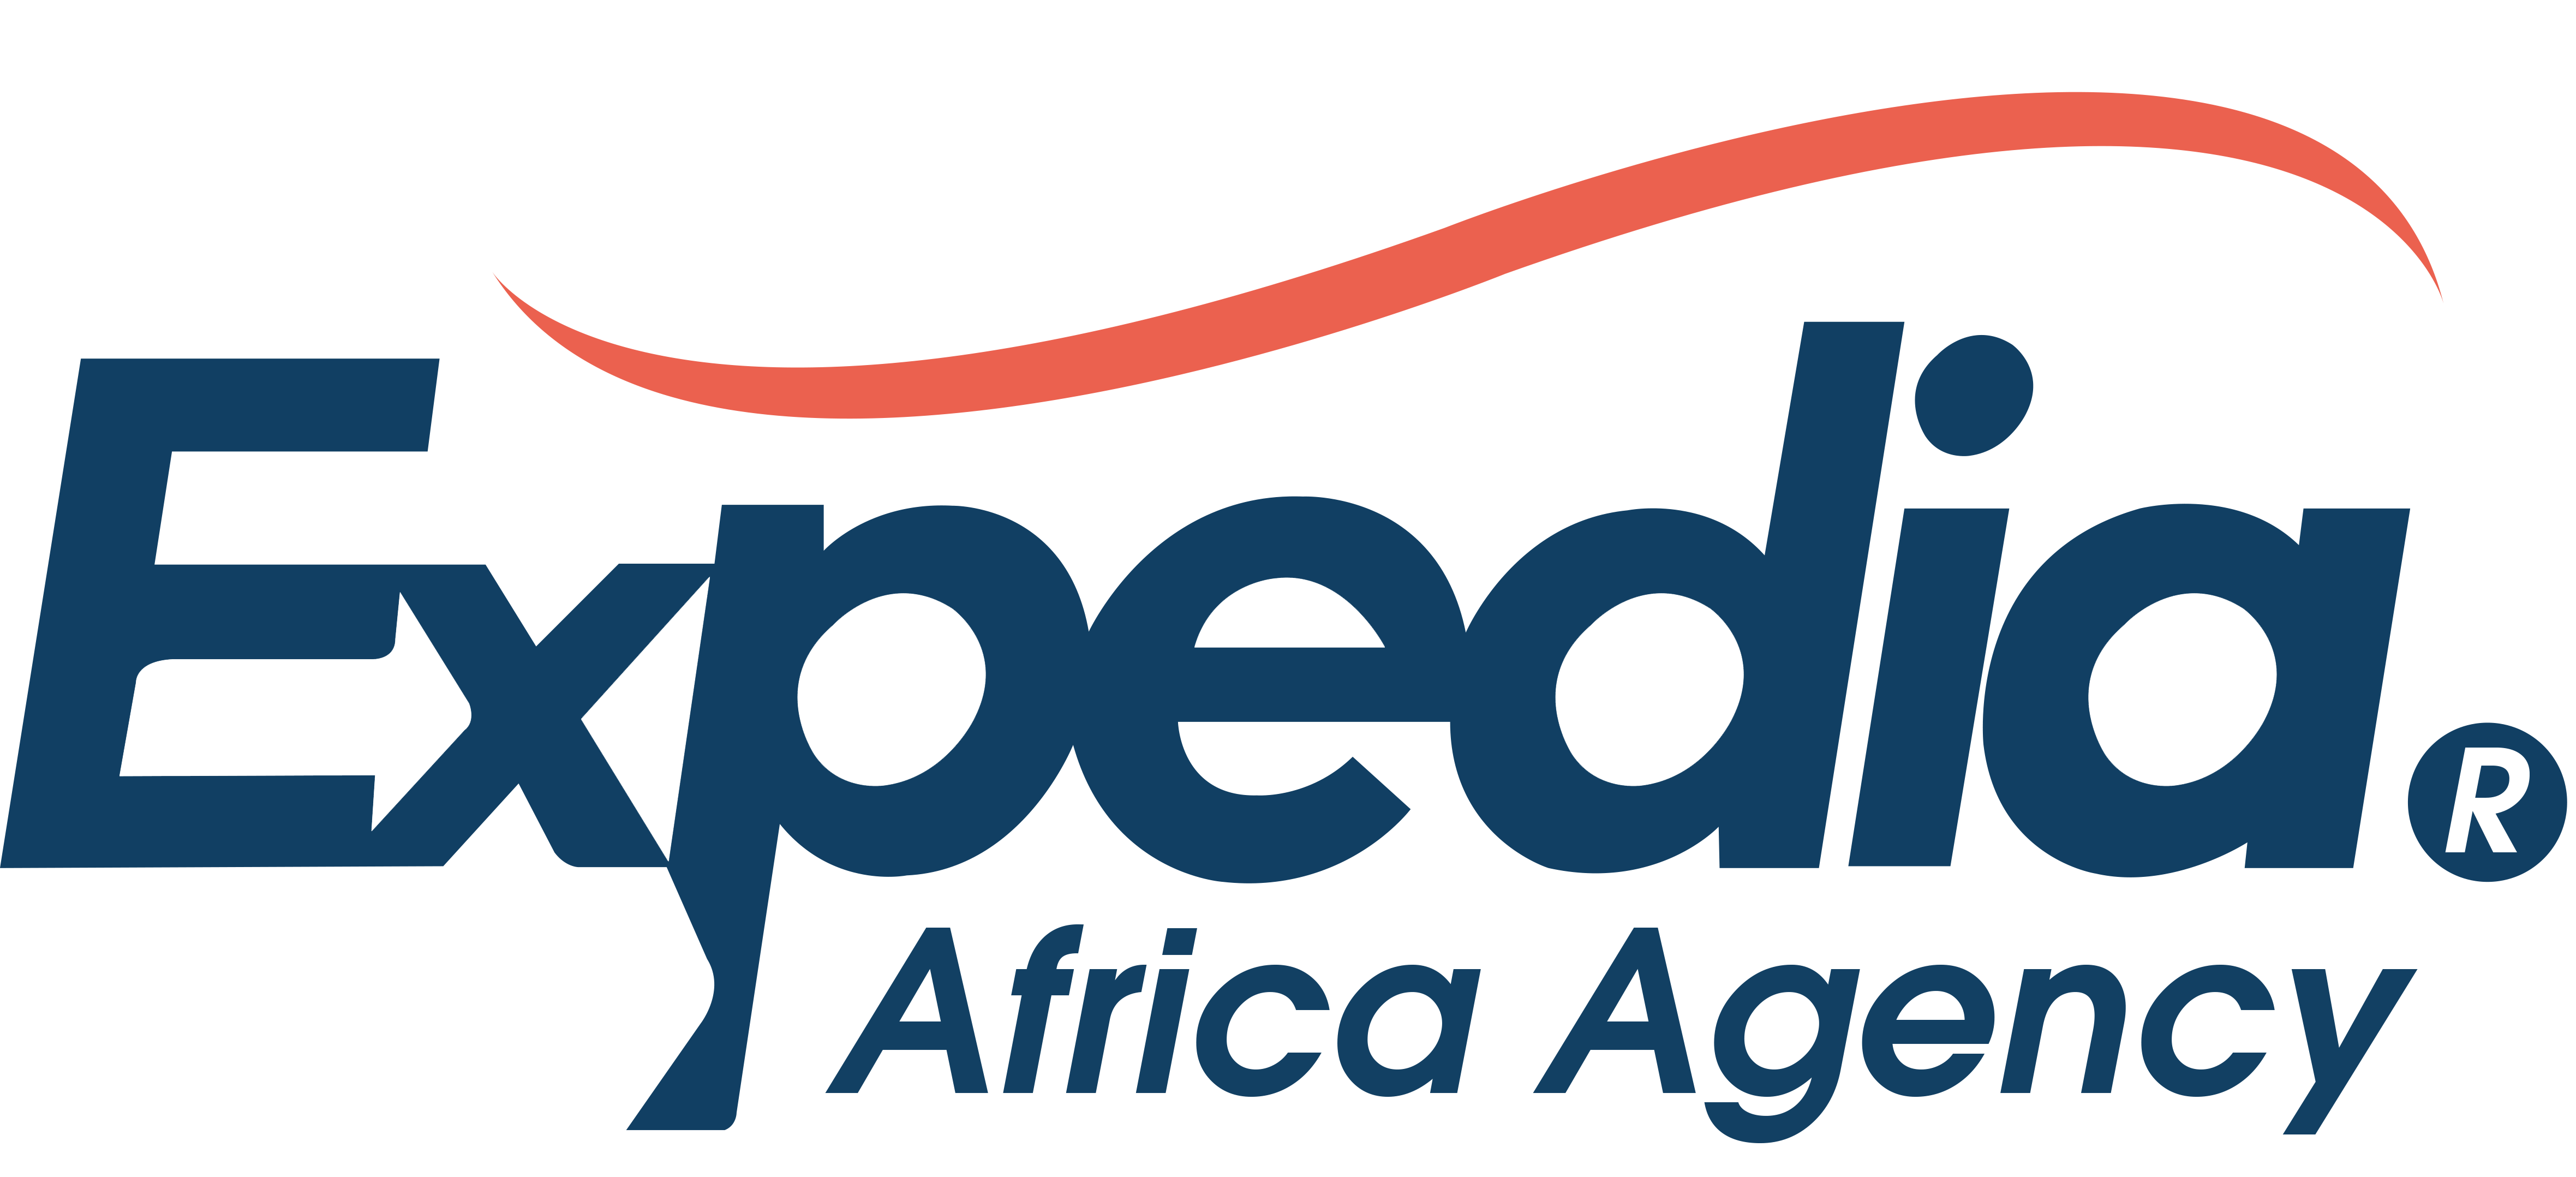 International Internships & Training Placement | Transformative Experiences | Expedia Africa Agency